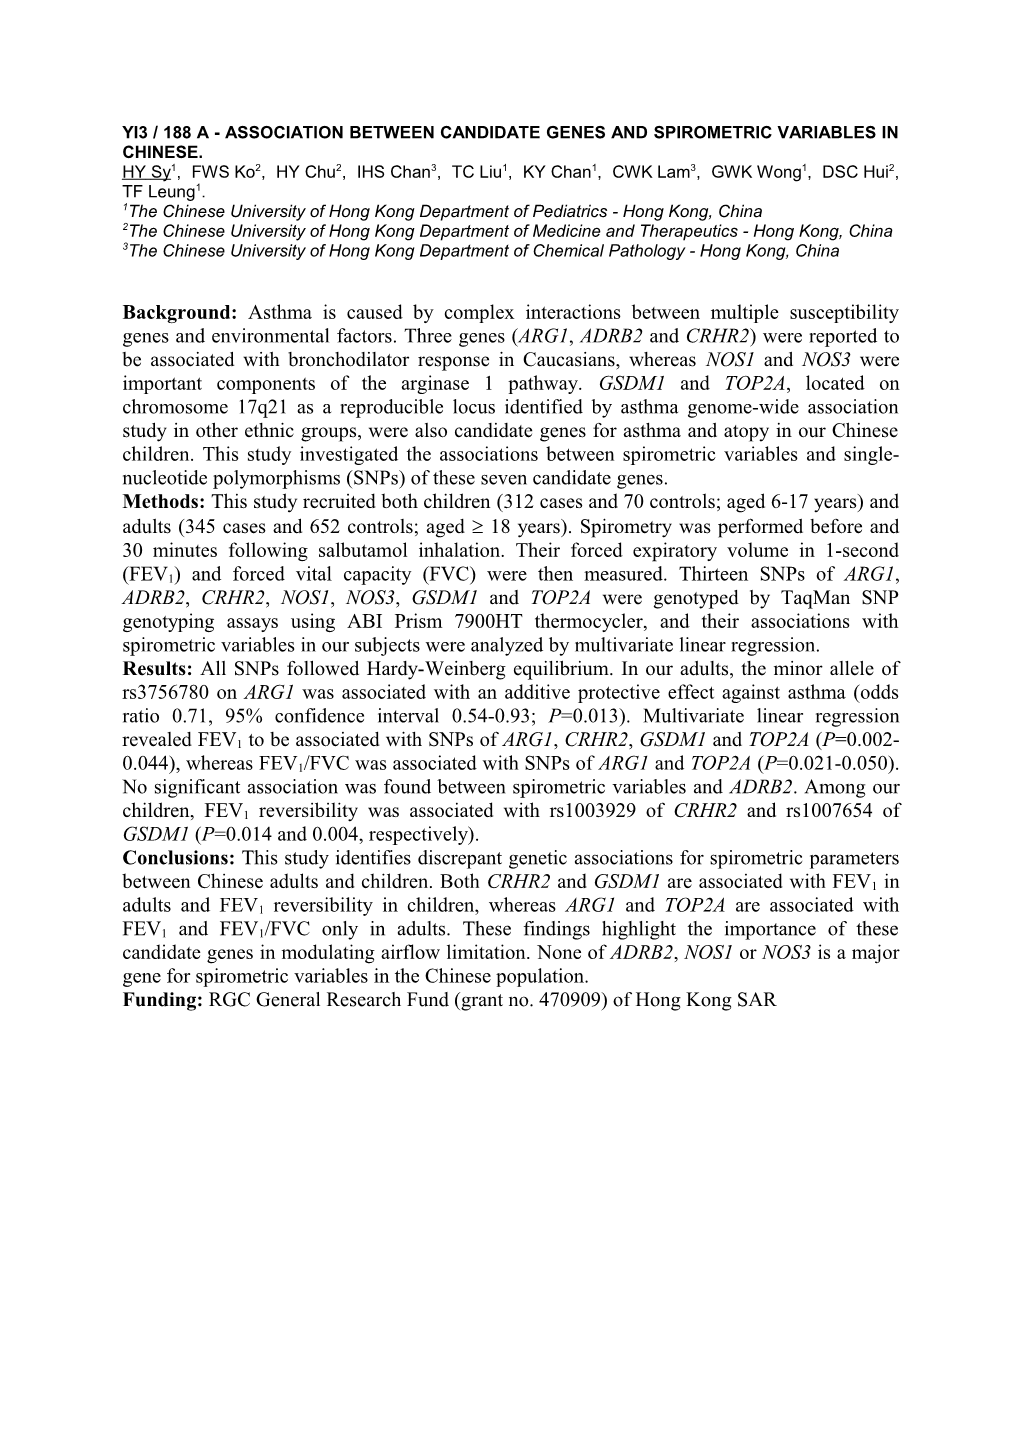 YI3 / 188 a - Association Between Candidate Genes and Spirometric Variables in Chinese